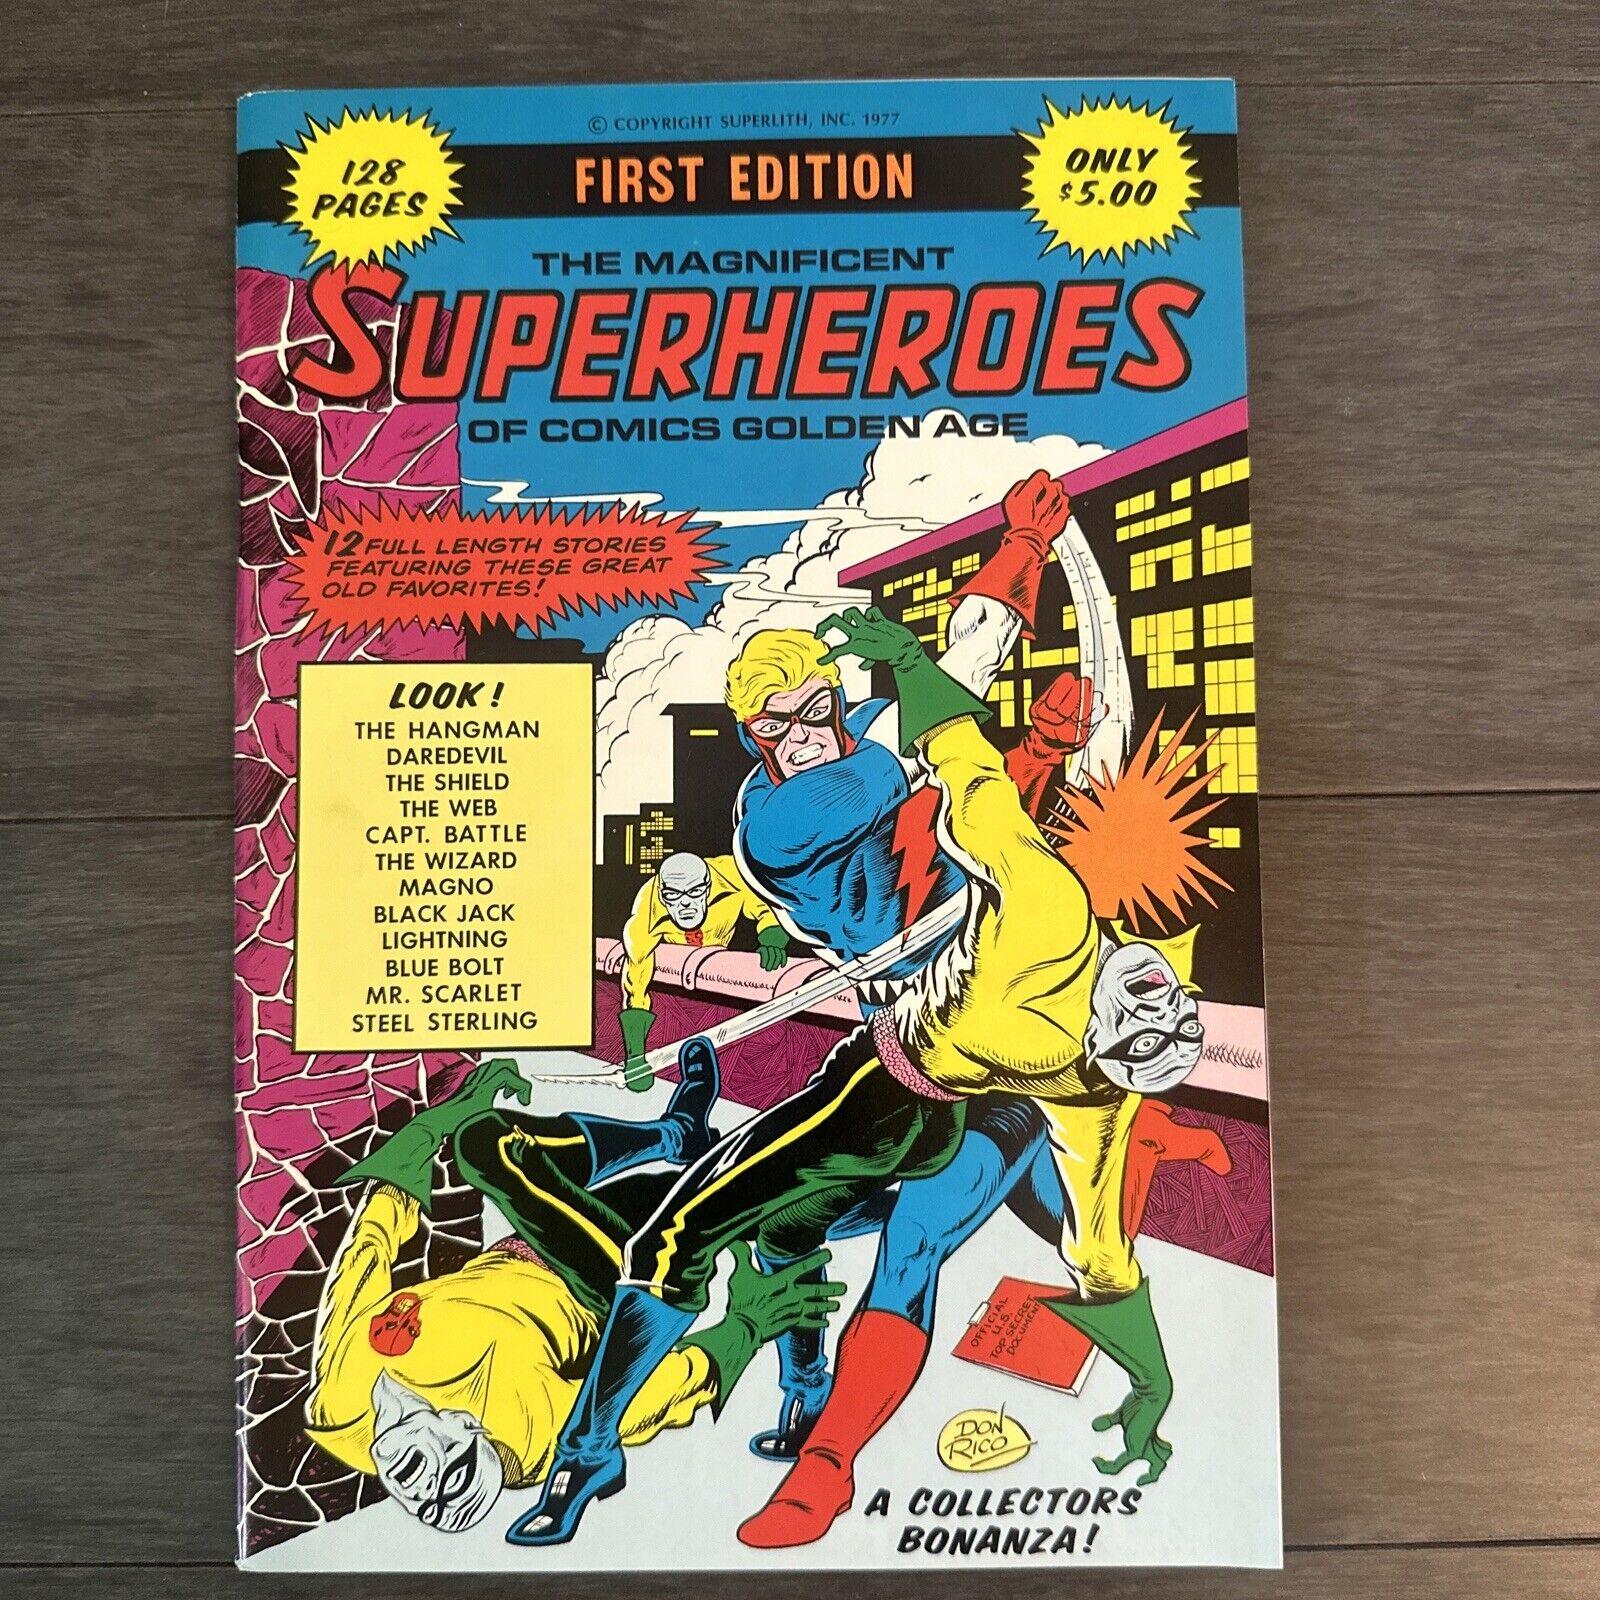 The Magnificent Superheroes of Comics Golden Age - First Edition Copyright 1977